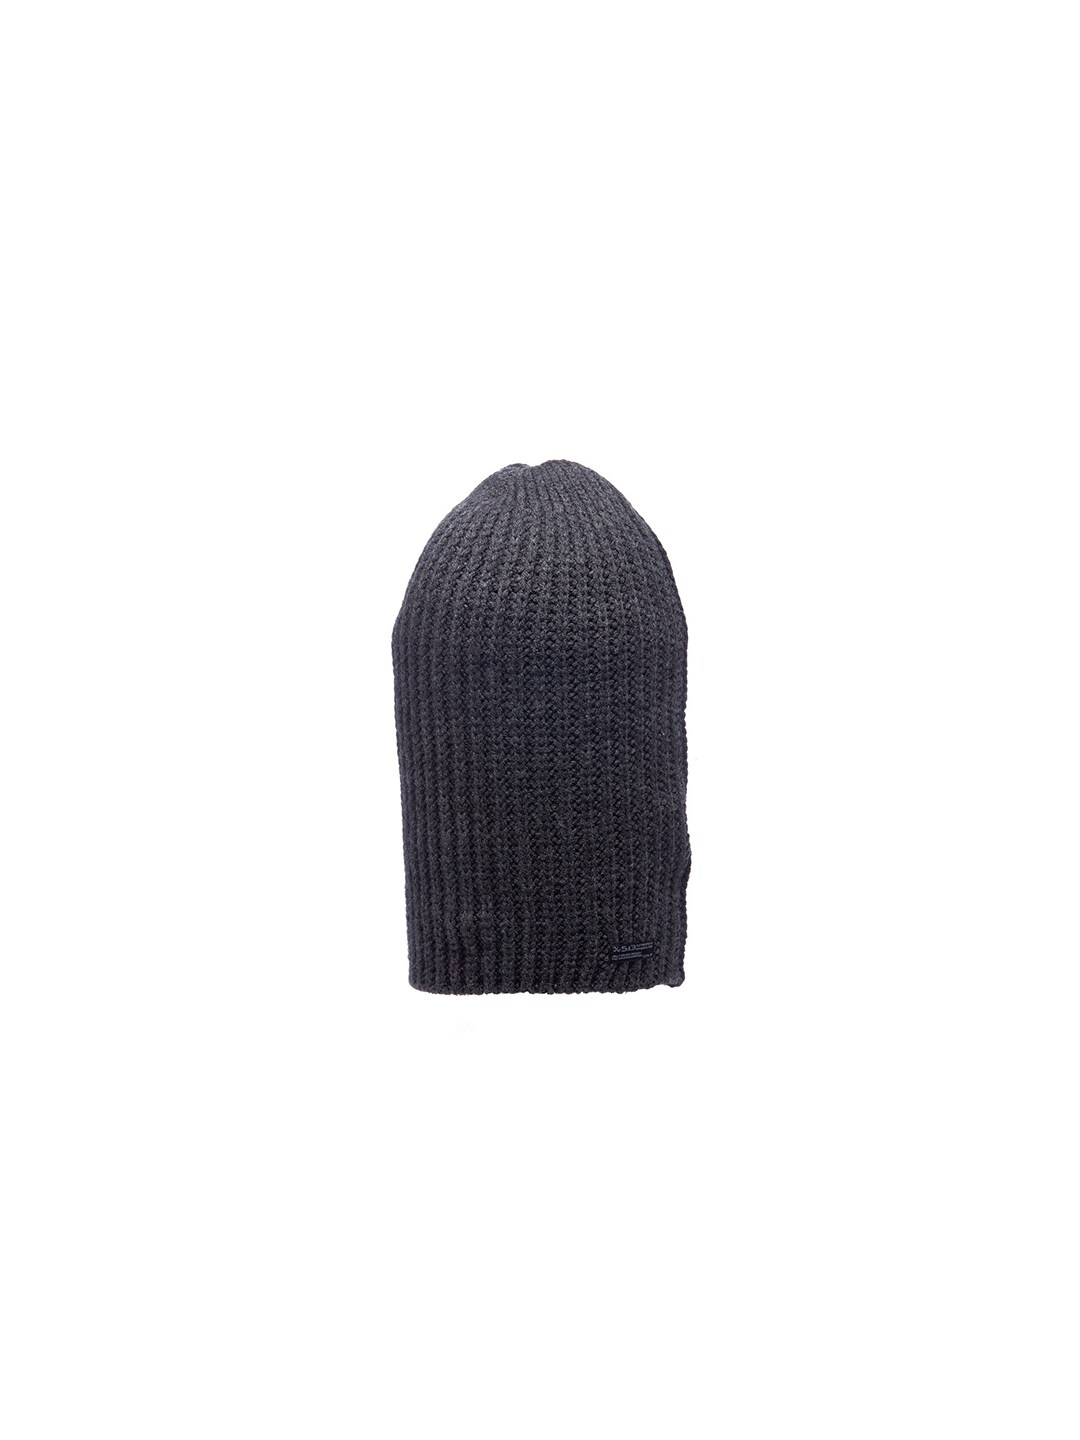 513 Women Charcoal Beanie Price in India